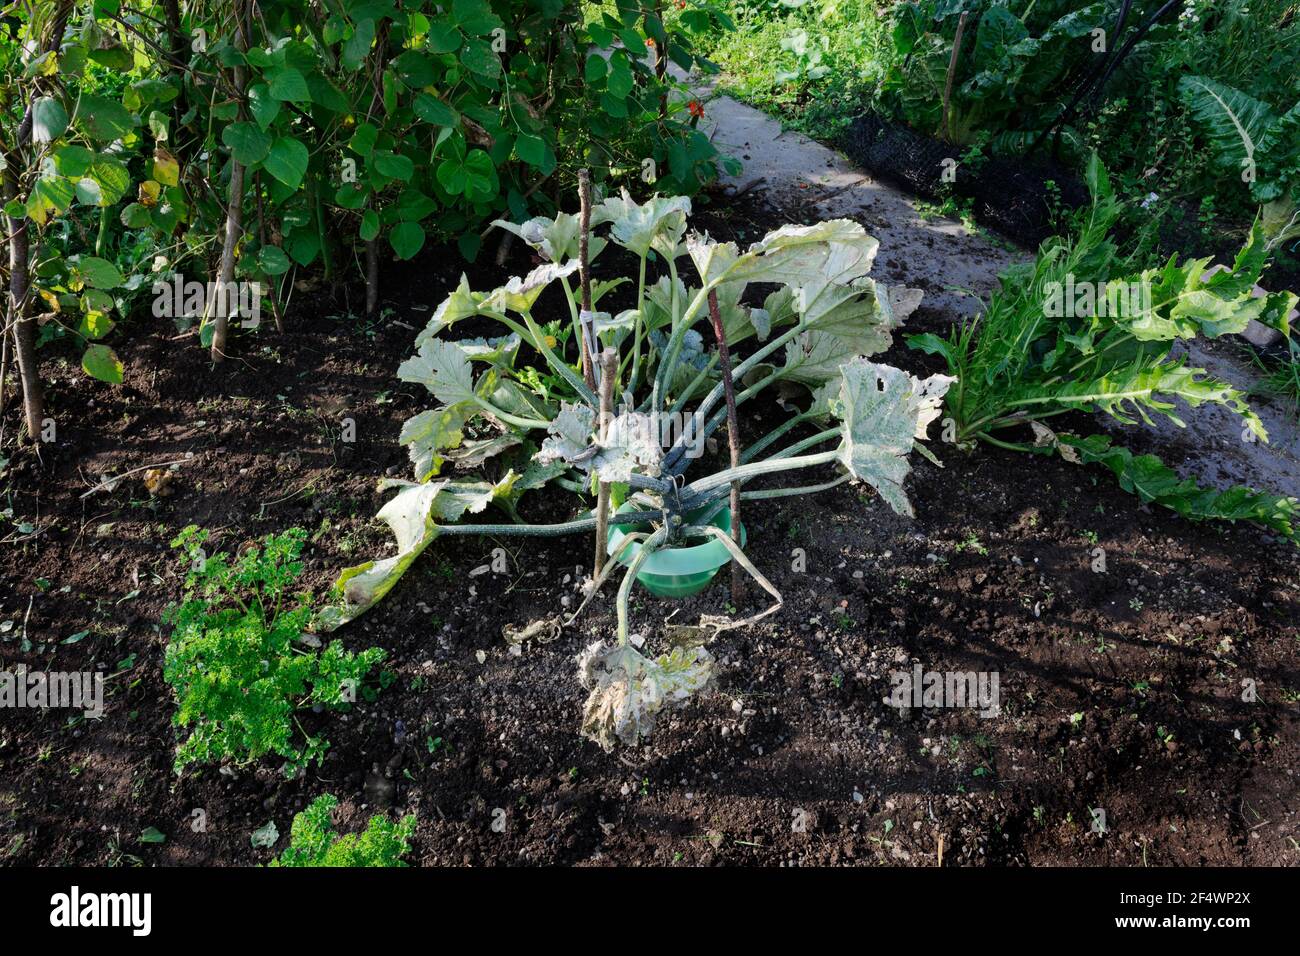 Courgette (zucchini) plant in vegetable garden, leaves and stems covered with white powdery mildew. Stock Photo